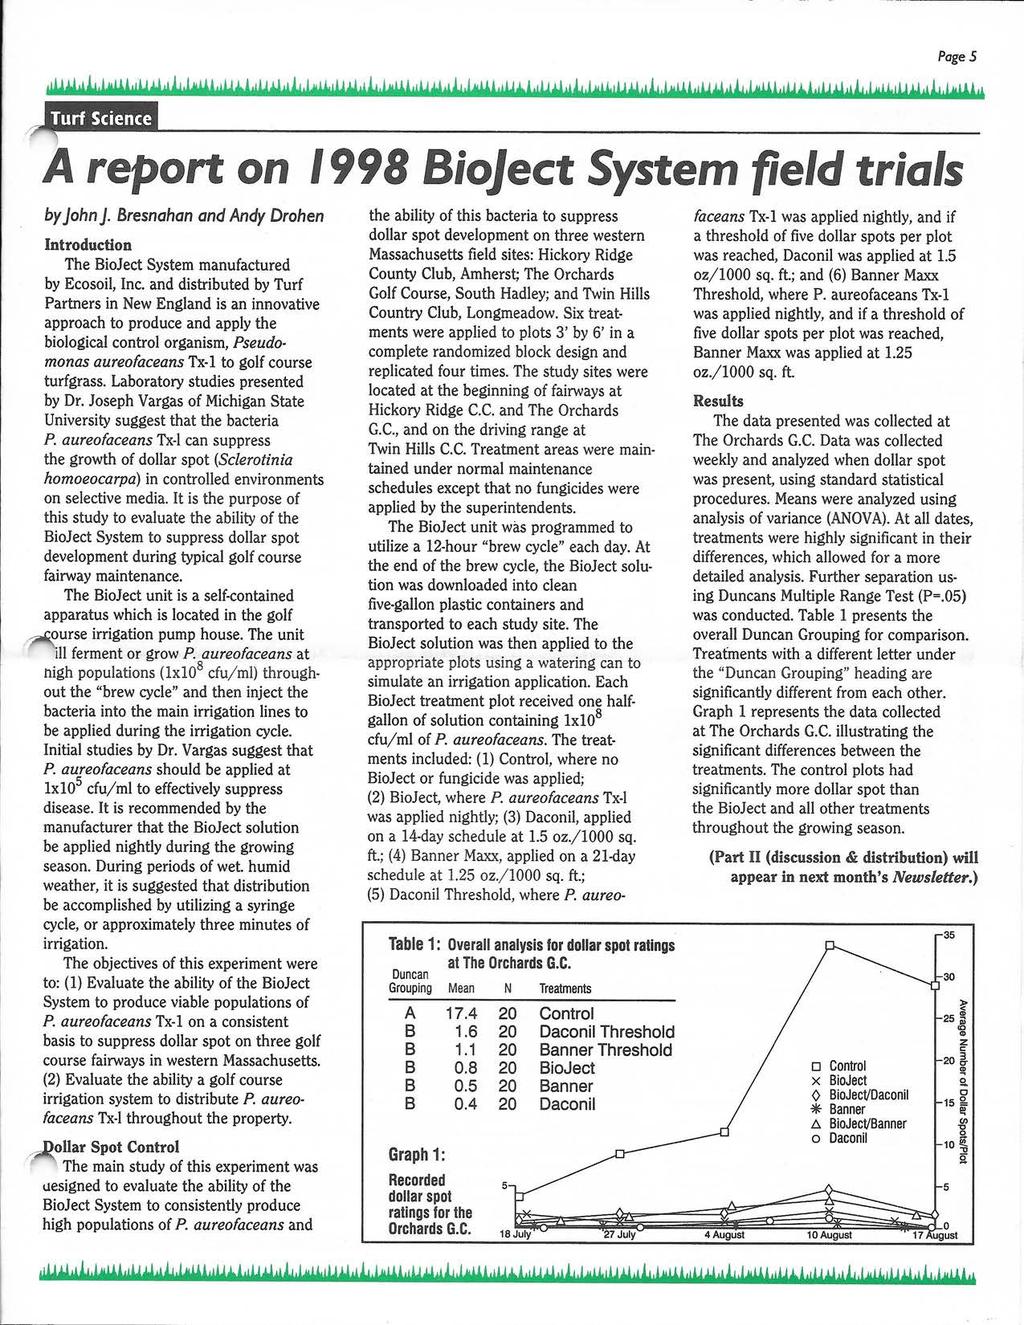 Page 1 jtosaaal A report on If fi Bioje ct System field by John J. Bresnahan and Andy Drohen Introduction The BioJect System manufactured by Ecosoil, Inc.